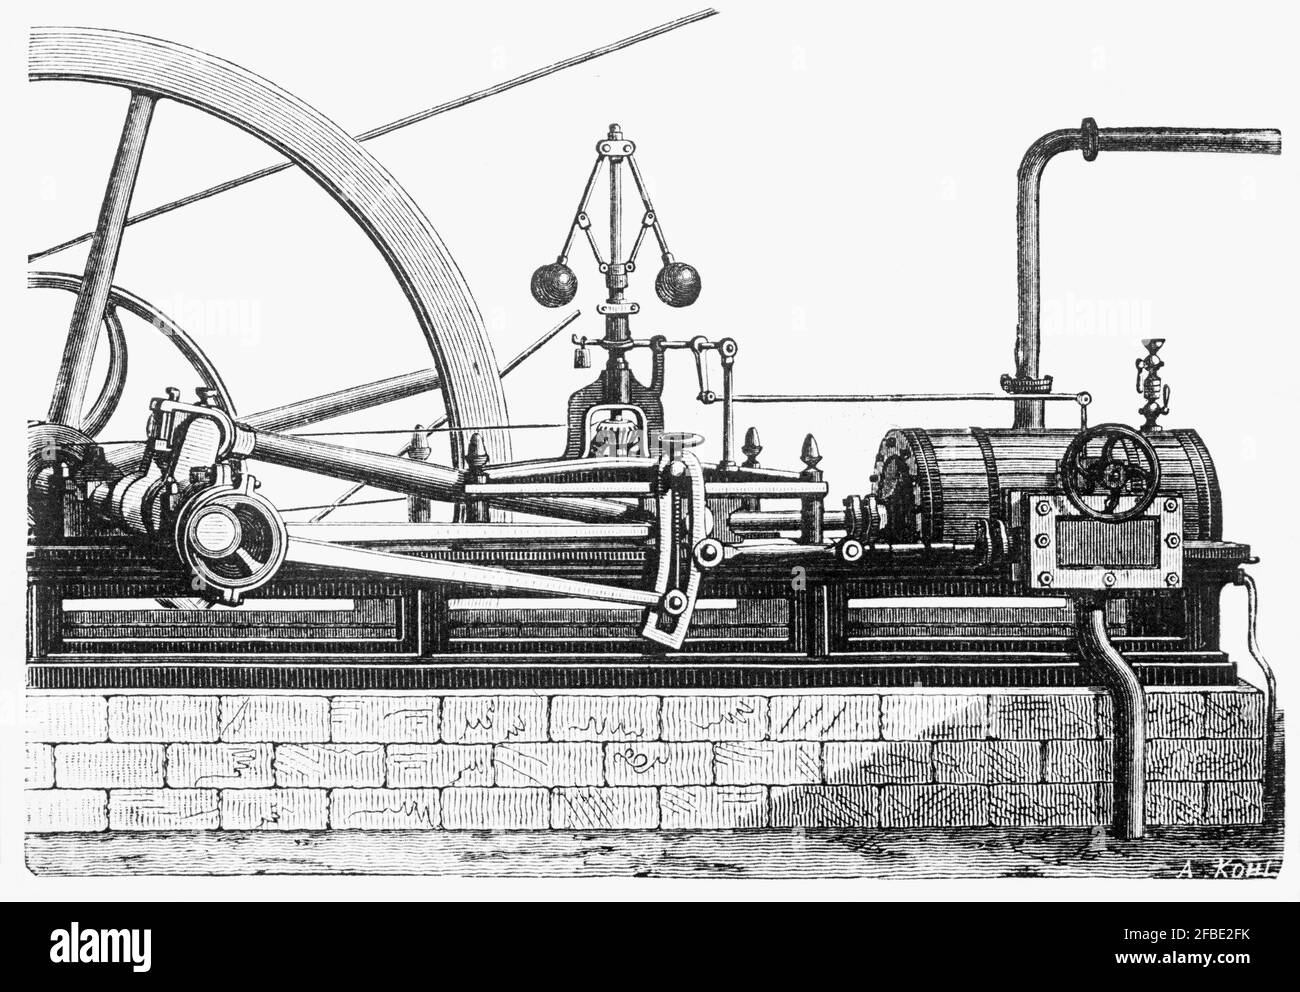 The early Watt steam engine was one of the driving forces of the Industrial Revolution. James Watt developed the design sporadically from 1763 to 1775 with support from Matthew Boulton. Watt's design saved so much more fuel compared with earlier designs that they were licensed based on the amount of fuel they would save. Watt never ceased developing the steam engine and his designs became synonymous with steam engines, and it was many years before significantly new designs began to replace the basic Watt design. Stock Photo